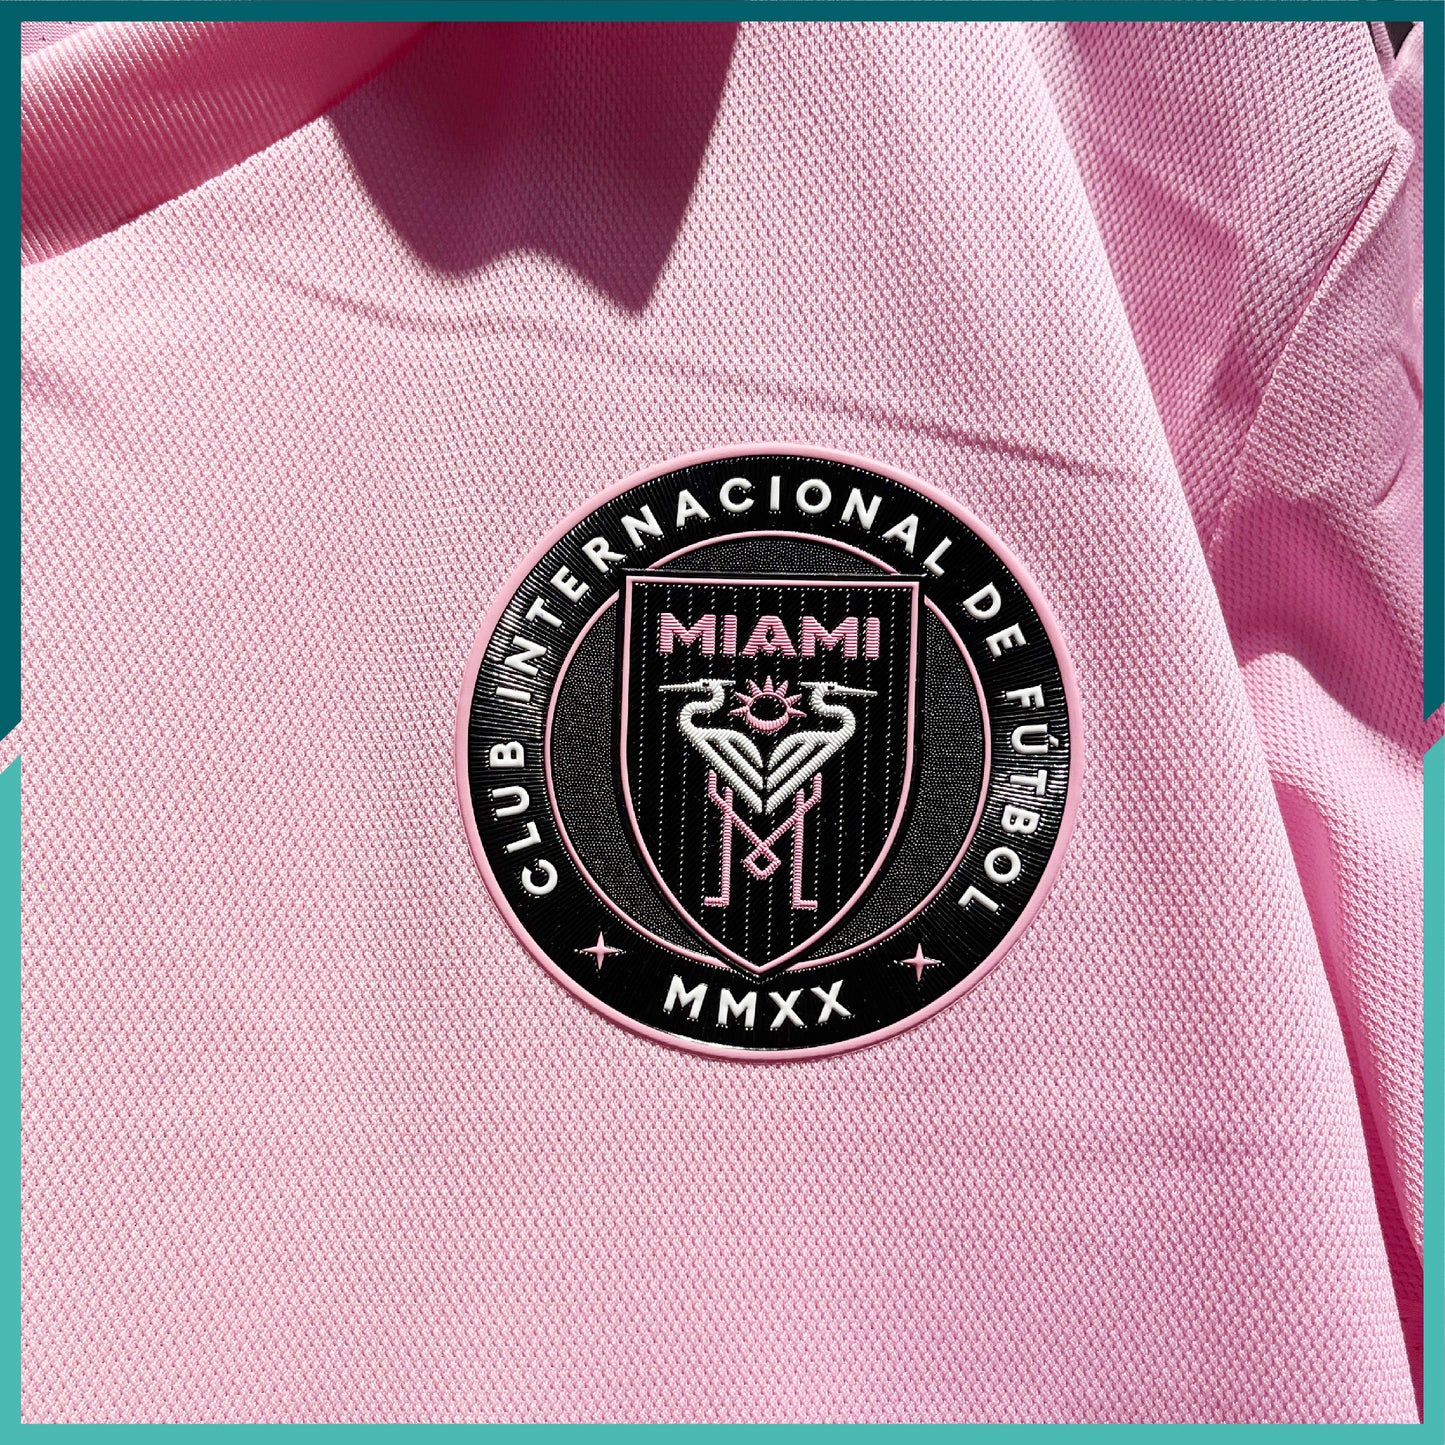 [Nameset & Patchs Included] 2022-23 Authentic Inter Miami Home Jersey